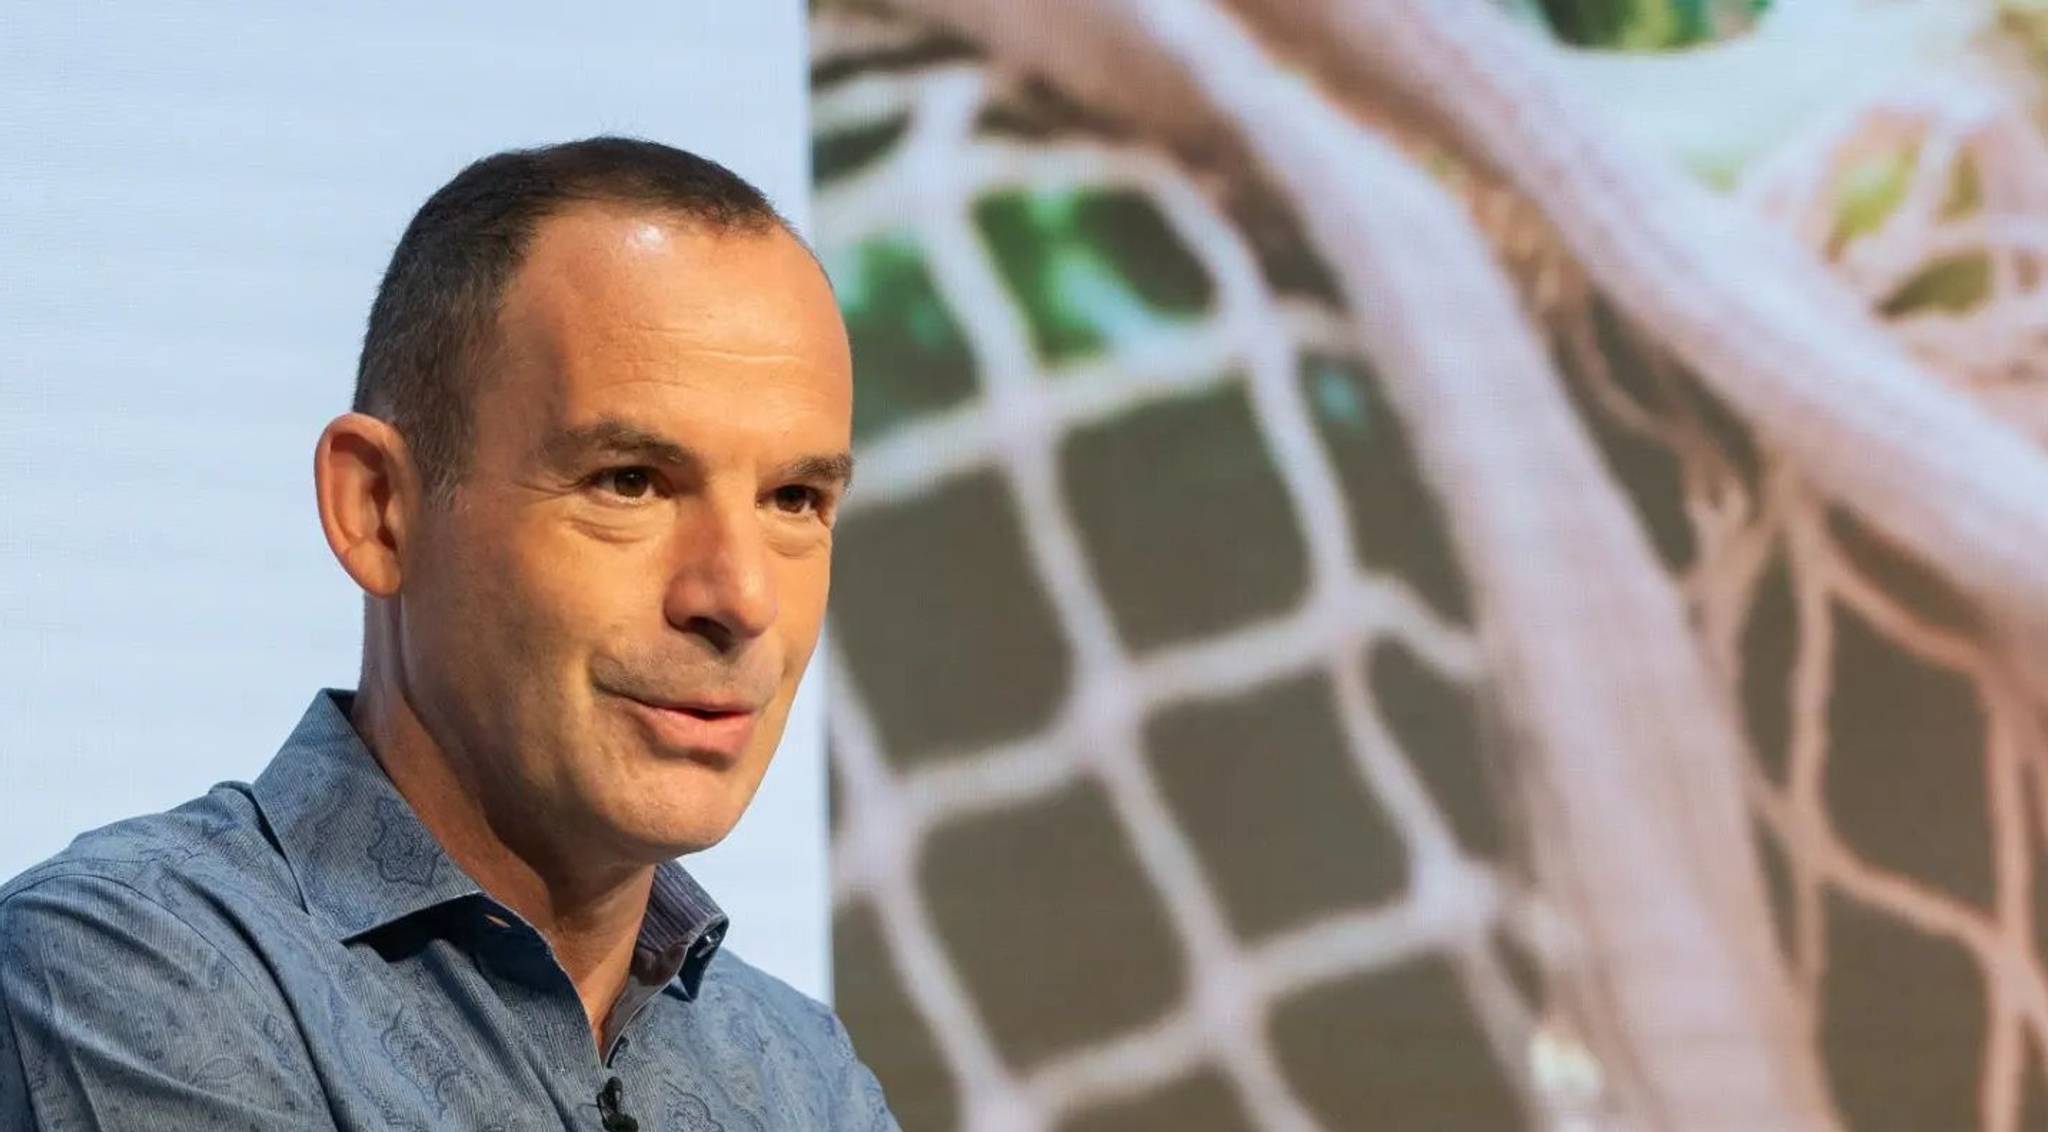 Martin Lewis: practical financial advice for Britons